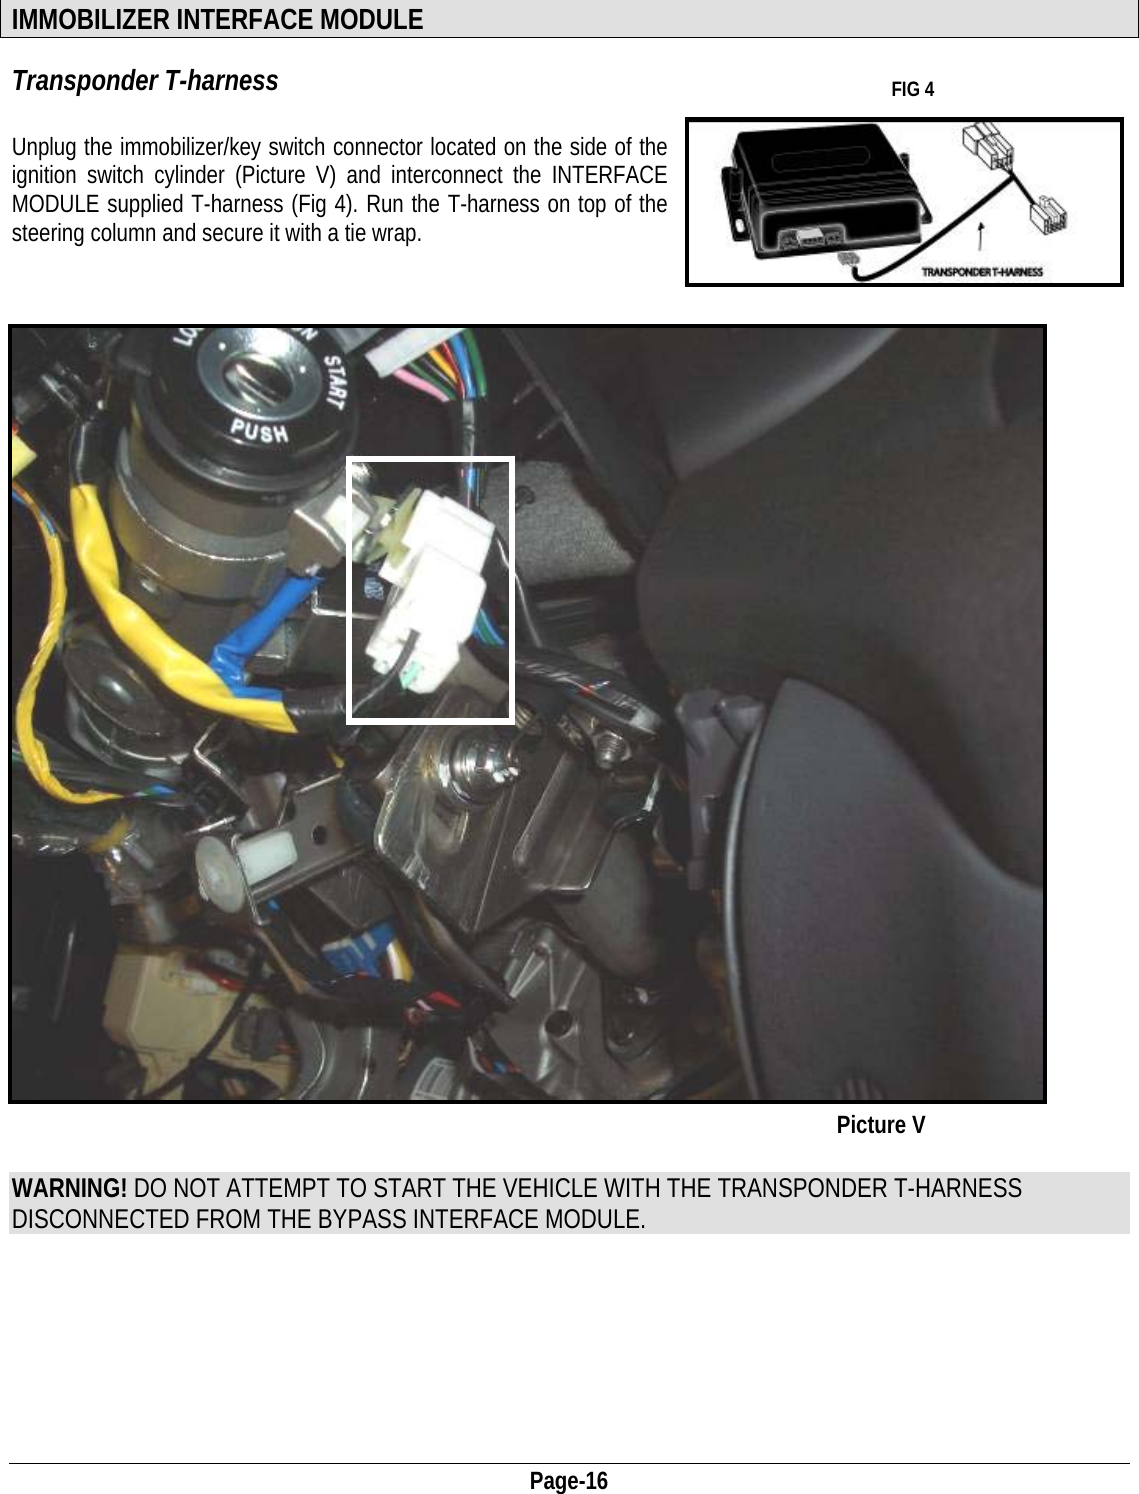  Page-16  IMMOBILIZER INTERFACE MODULE Transponder T-harness   FIG 4  Unplug the immobilizer/key switch connector located on the side of the ignition switch cylinder (Picture V) and interconnect the INTERFACE MODULE supplied T-harness (Fig 4). Run the T-harness on top of the steering column and secure it with a tie wrap.                                        Picture V    WARNING! DO NOT ATTEMPT TO START THE VEHICLE WITH THE TRANSPONDER T-HARNESS DISCONNECTED FROM THE BYPASS INTERFACE MODULE.       